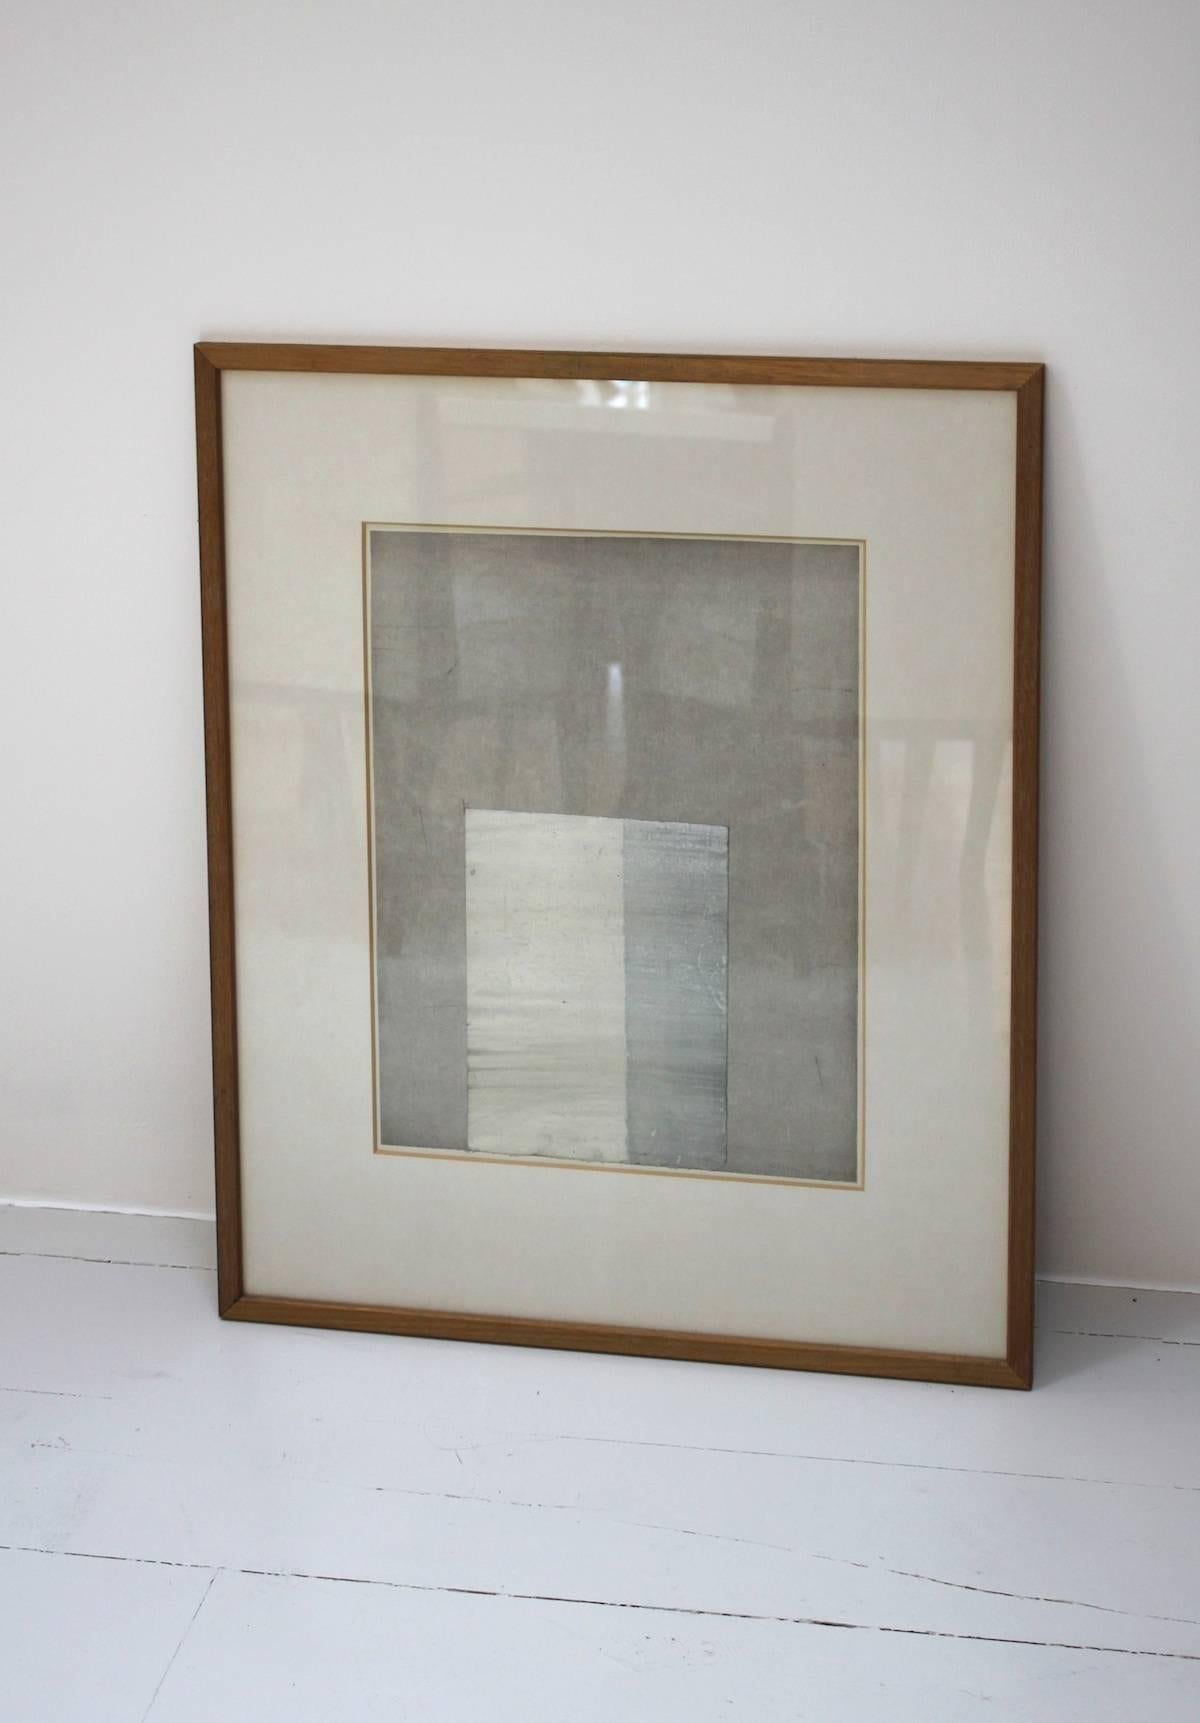 Artist: Philip Reeves (b.1931).
Title: The Tower.
Date: circa 1950s.
Medium: Mixed-media on paper.
Signed lower right.
Dimensions (framed): 72 x 60.5 cm.